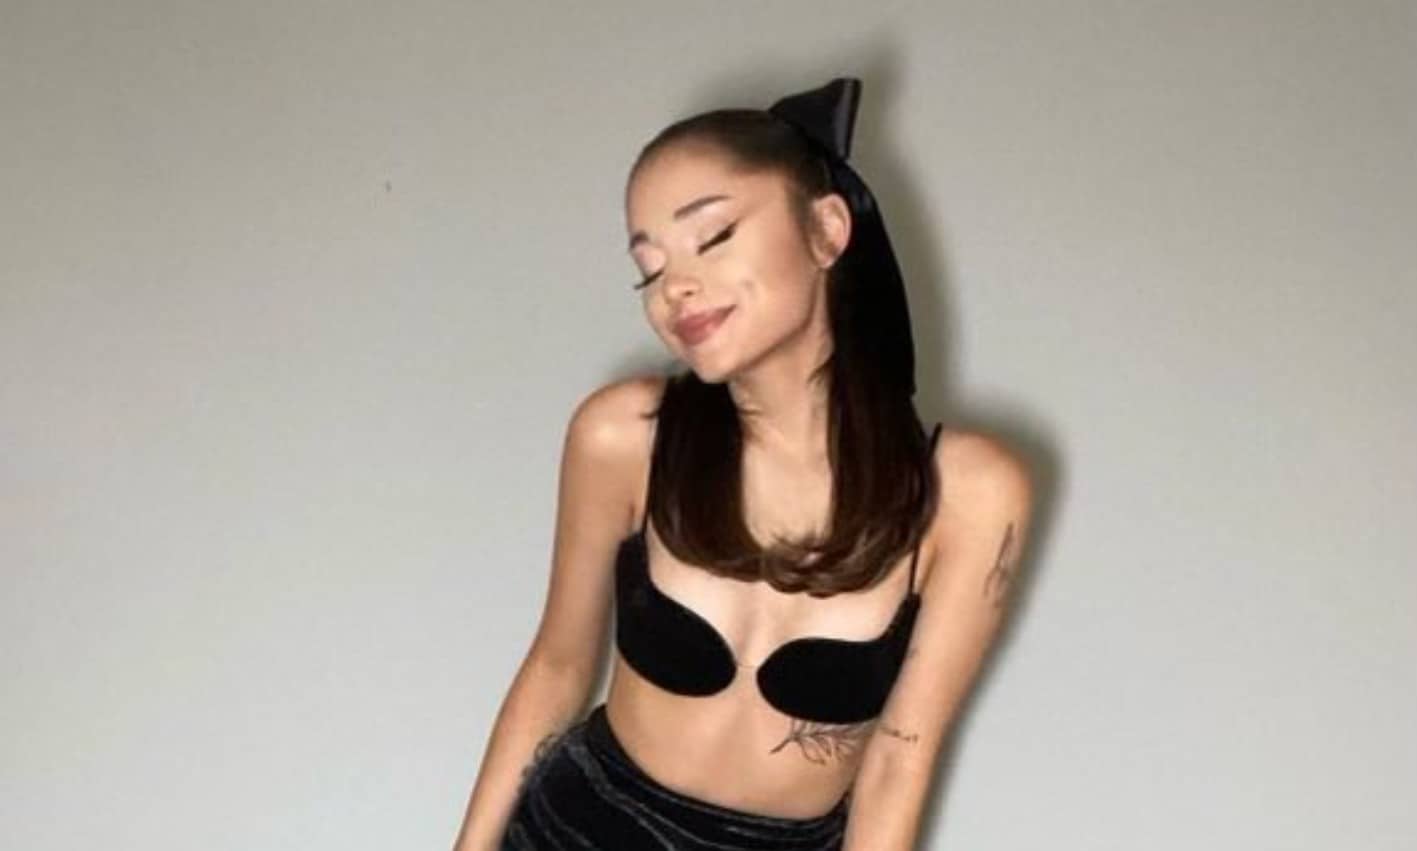 Ariana Grande Bra Top Her Wedding Triggers Angry Online "inappropriate And Disrespectful"